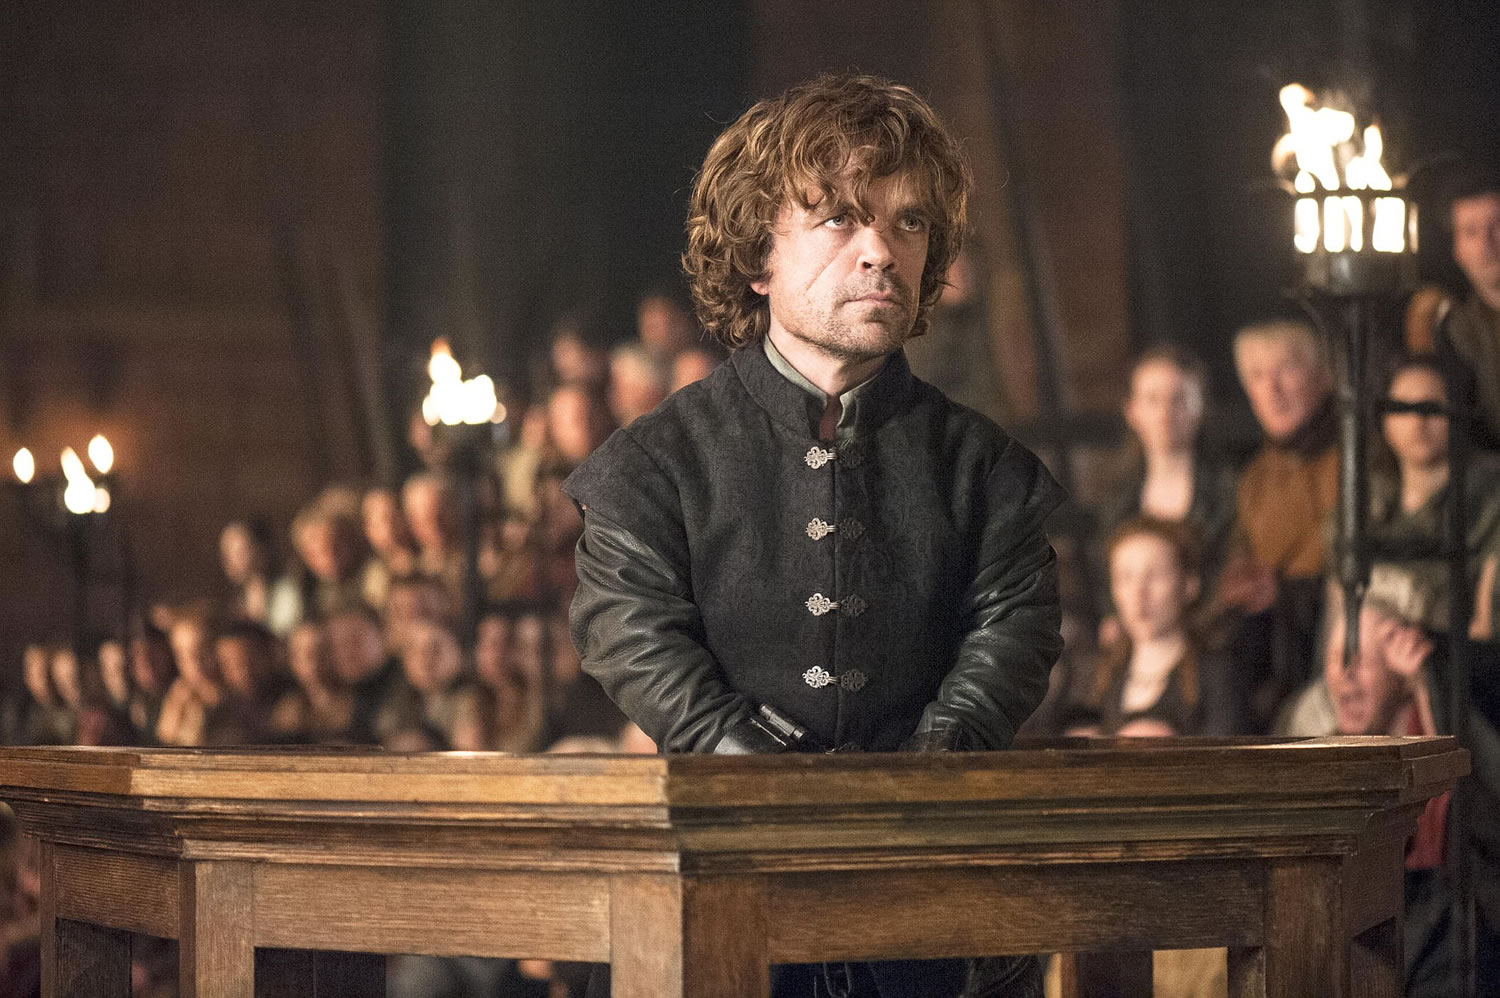 HBO show &quot;Game of Thrones&quot; garnered 19 Emmy Award nominations on Thursday, including one for best drama series.